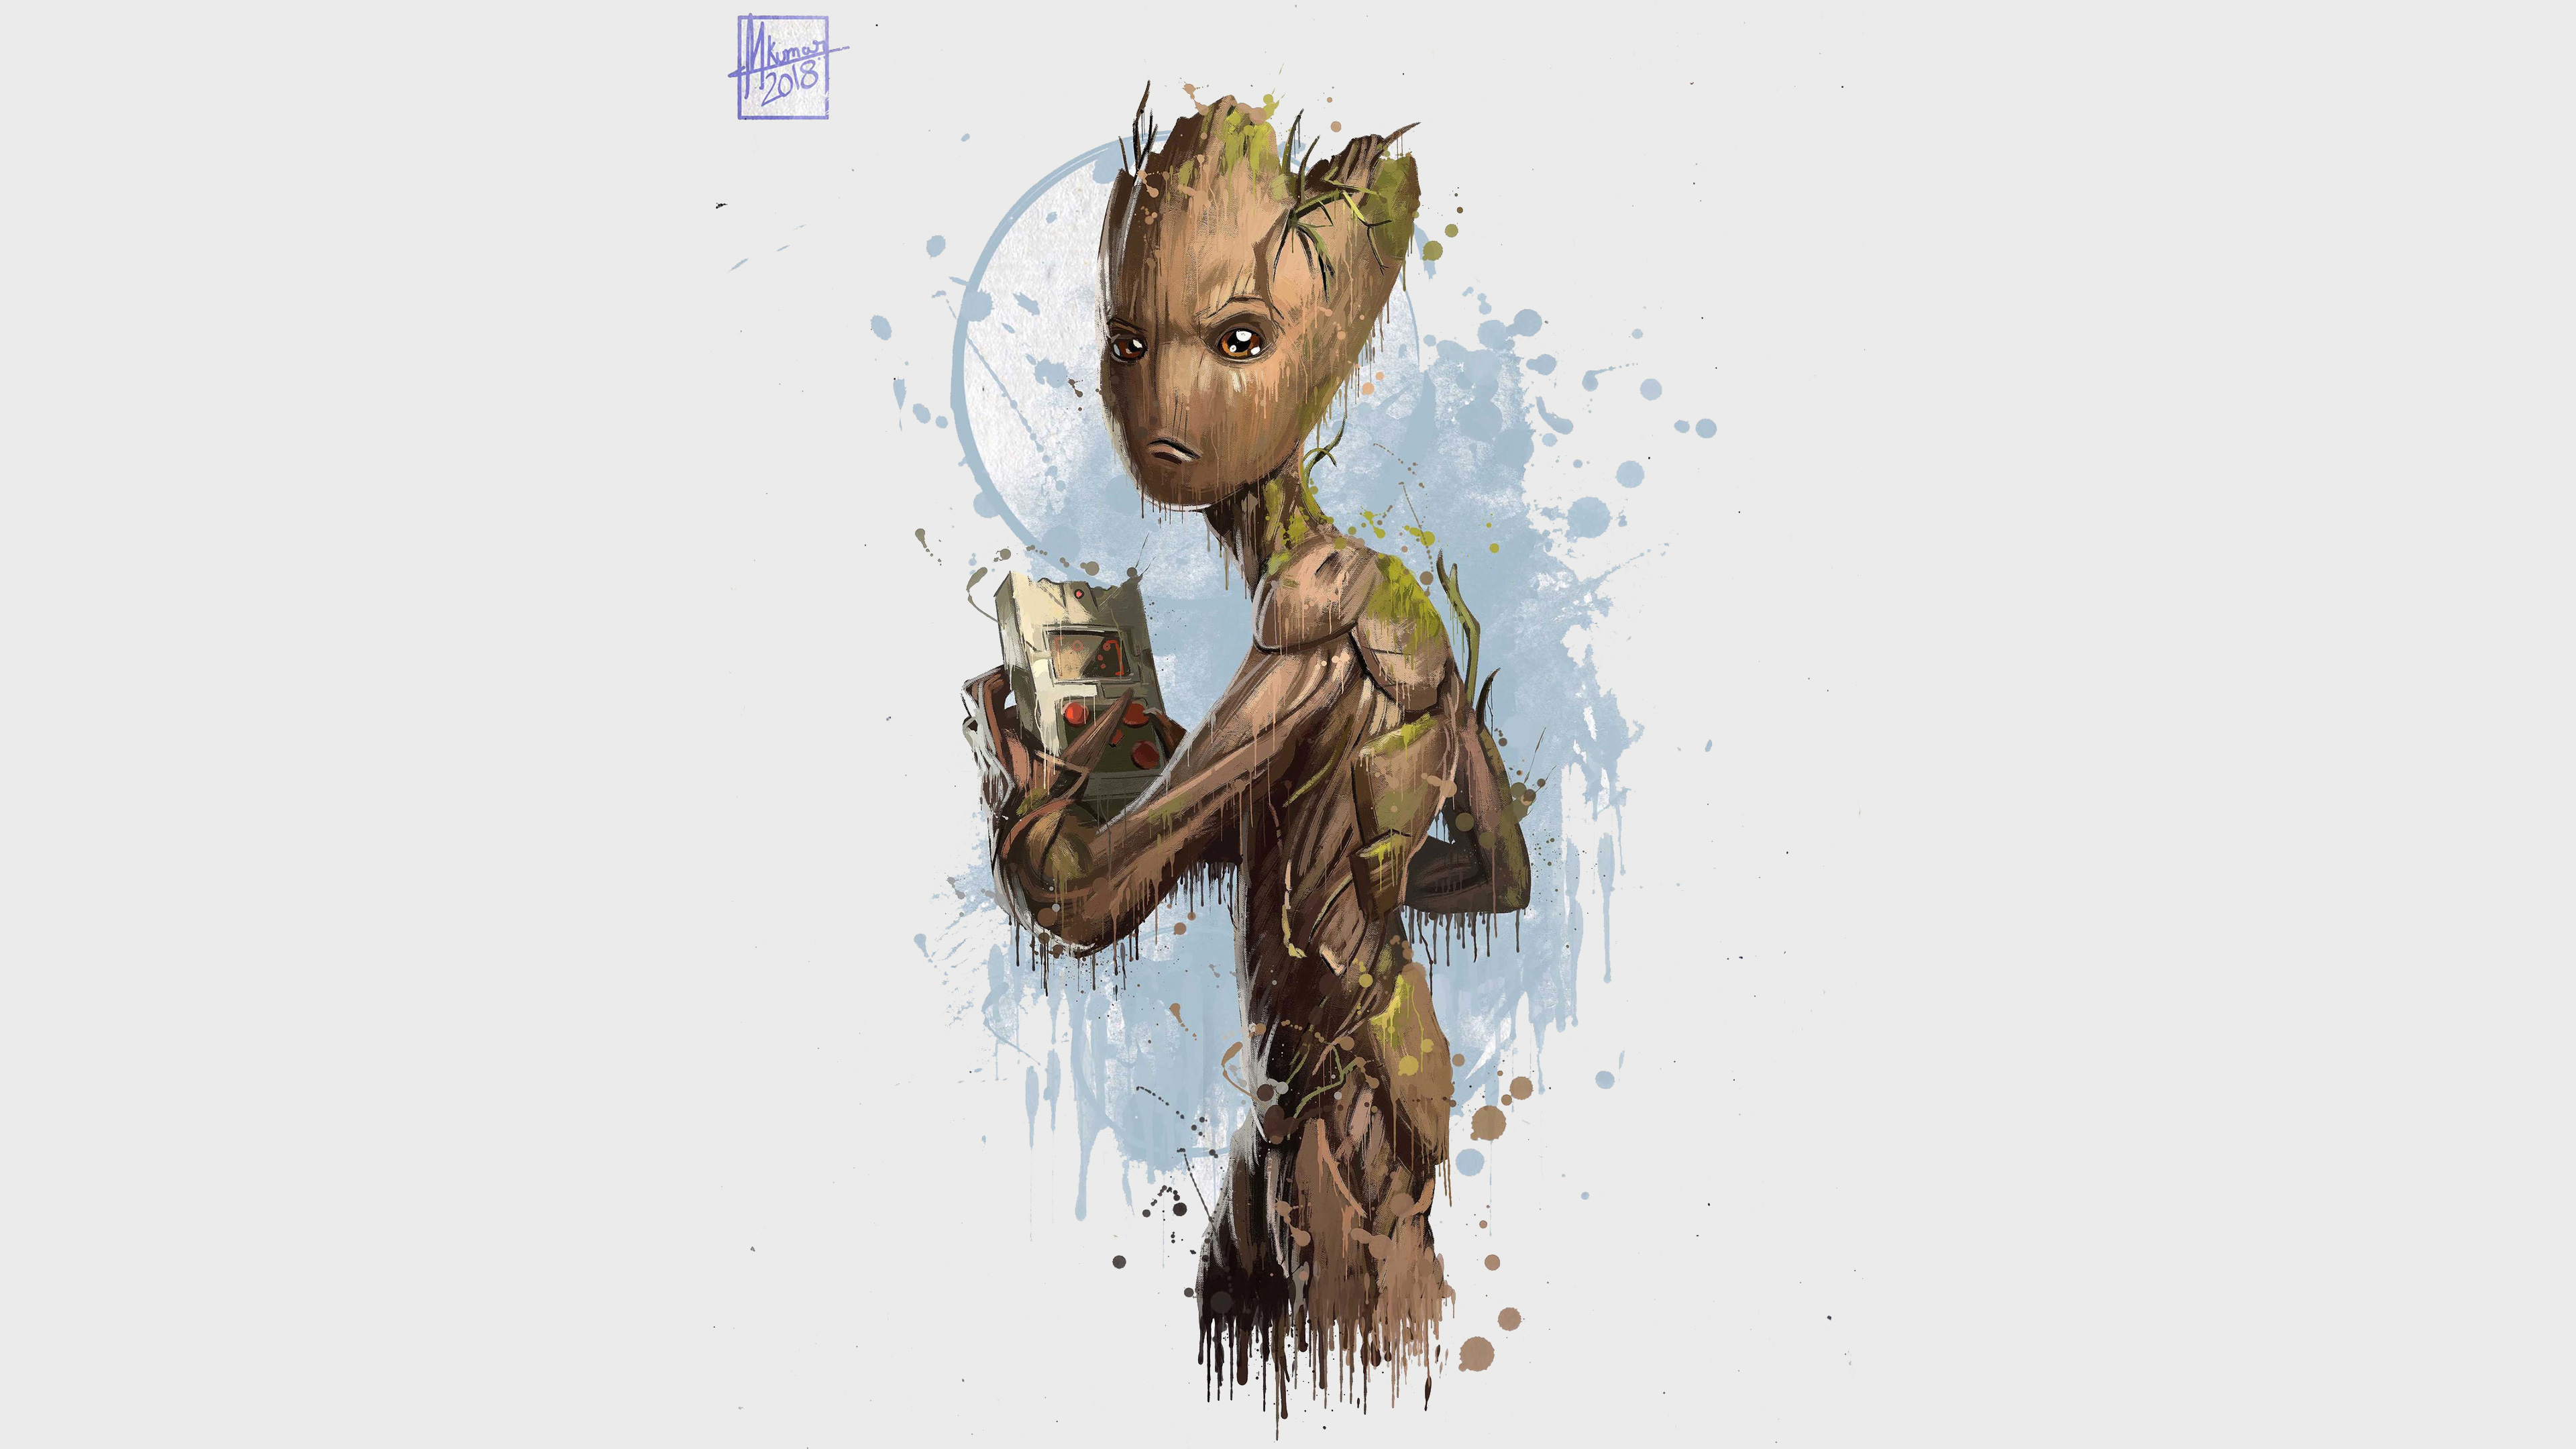 640x960 Groot In Avengers Infinity War 18 Iphone 4 Iphone 4s Hd 4k Wallpapers Images Backgrounds Photos And Pictures